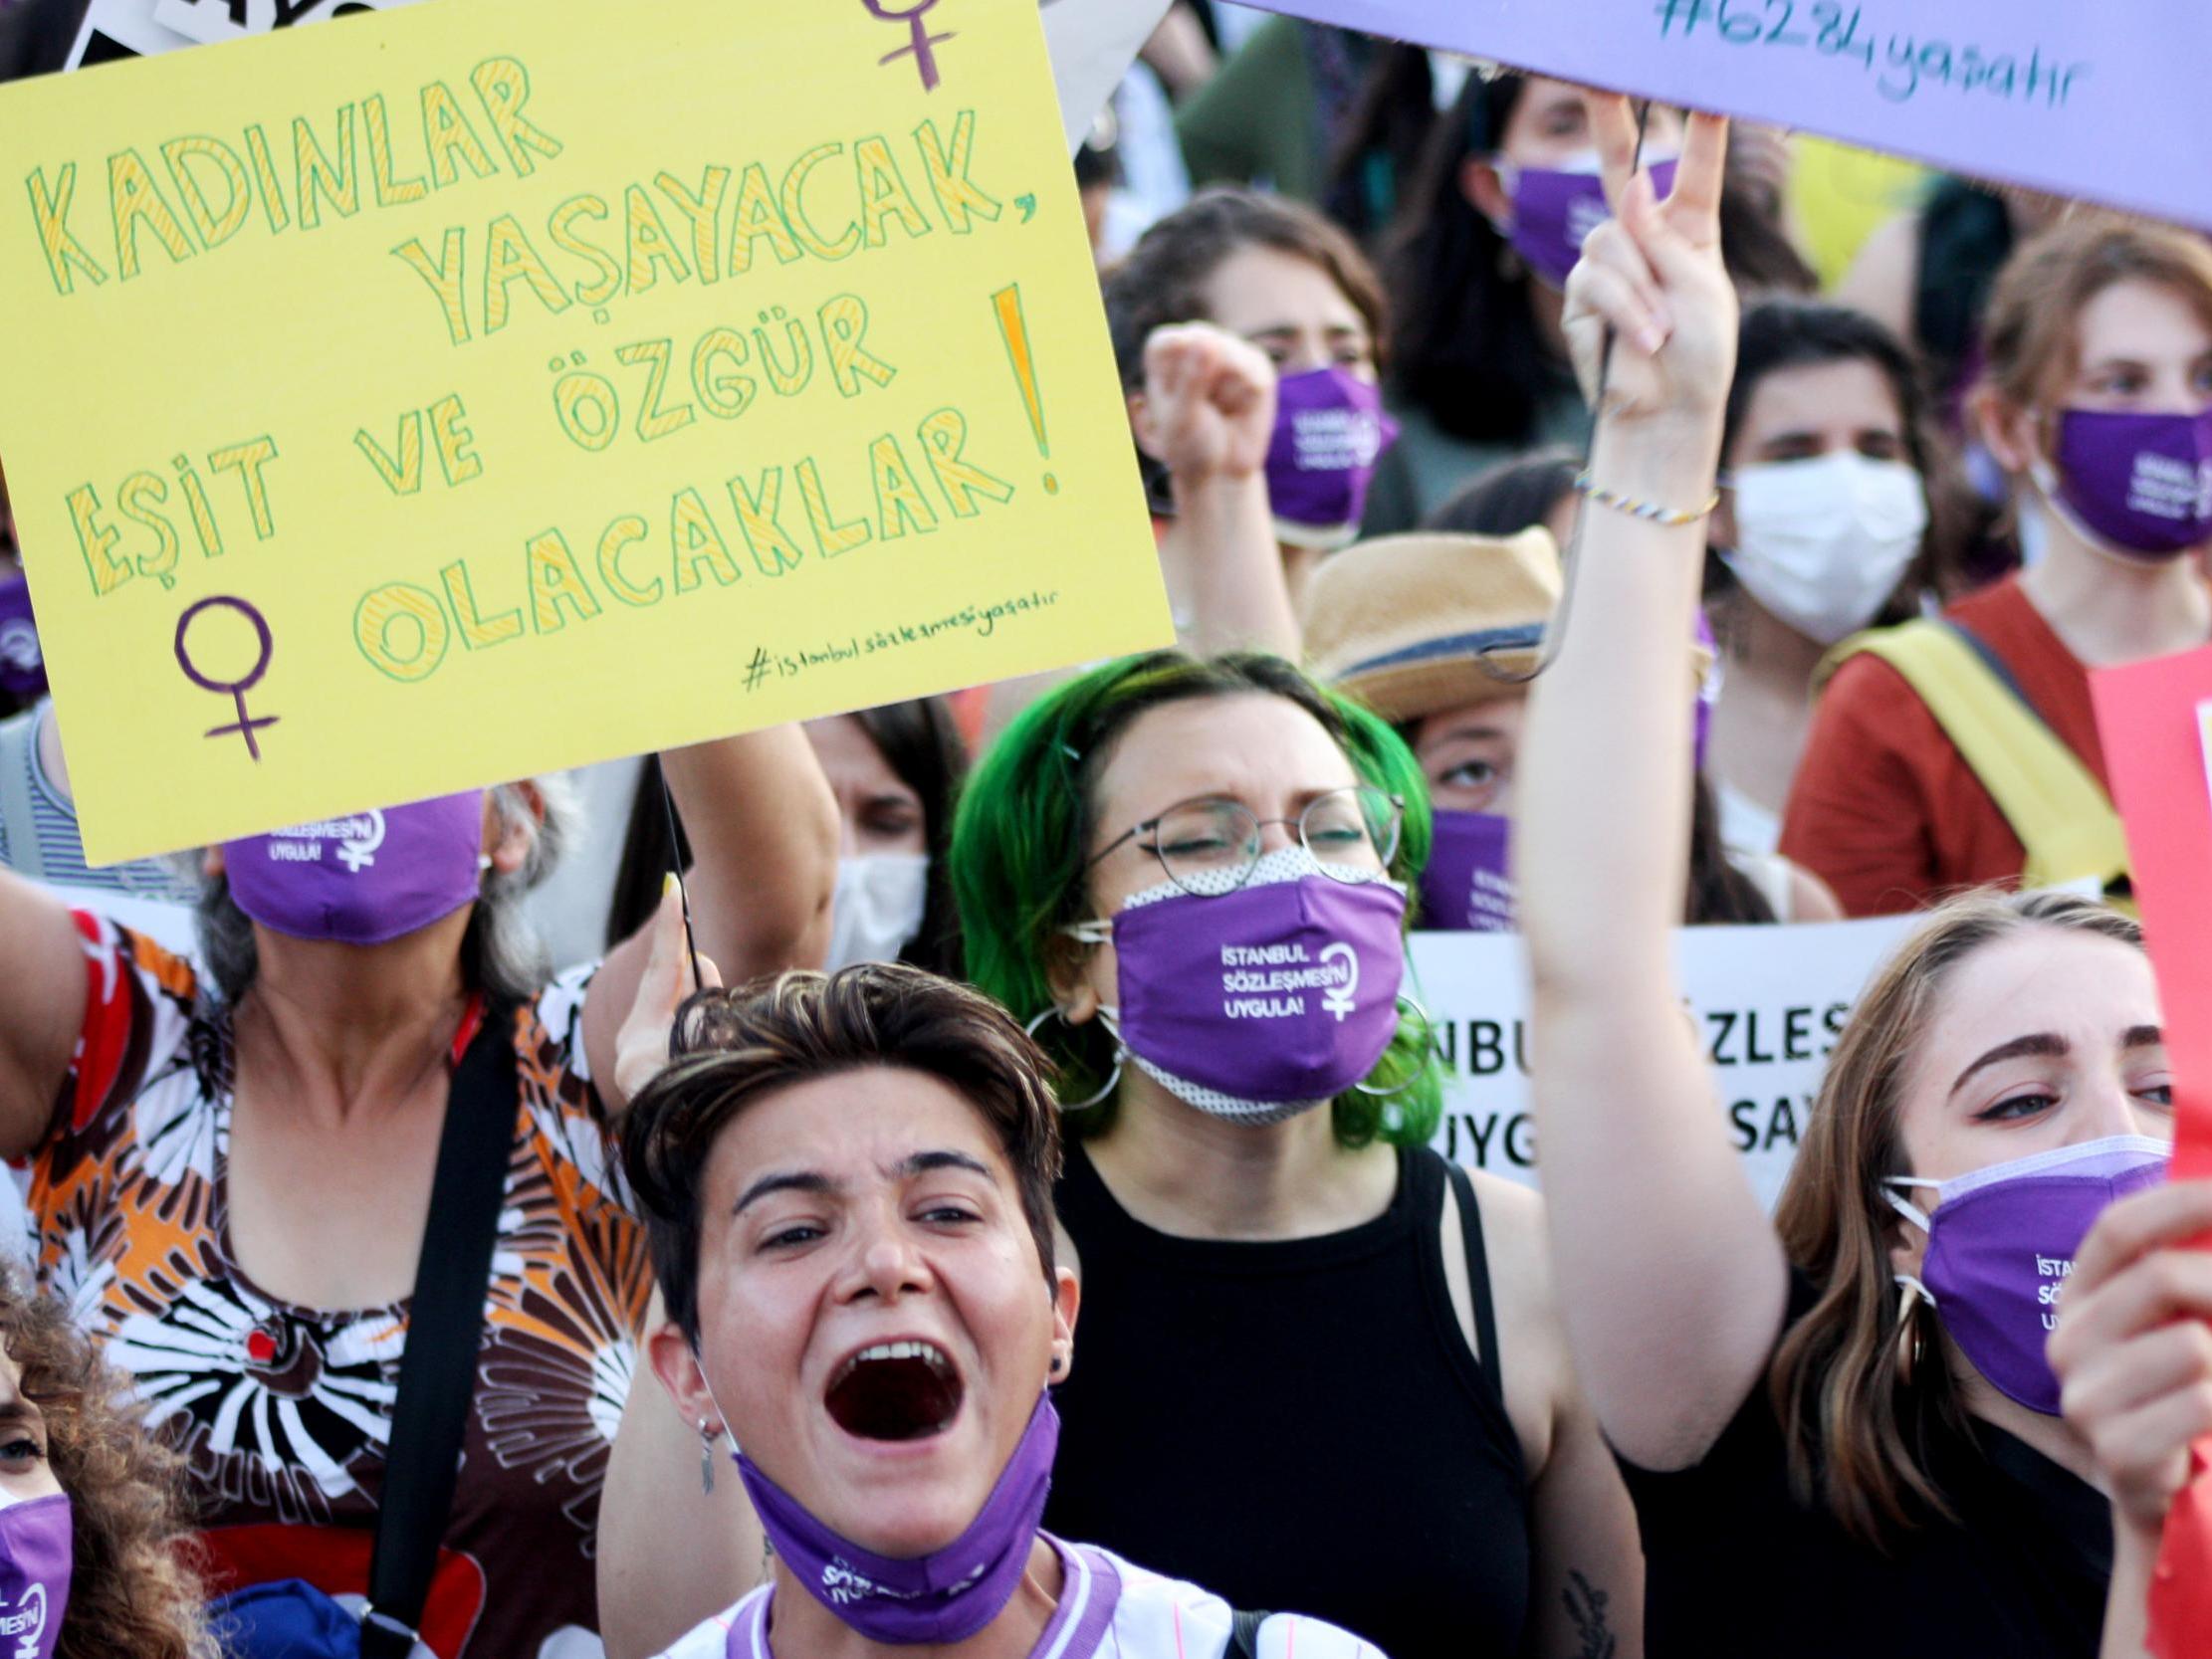 Protester holds a sign reading ‘Women will live freely and equally’ at an Istanbul protest against femicide in Turkey